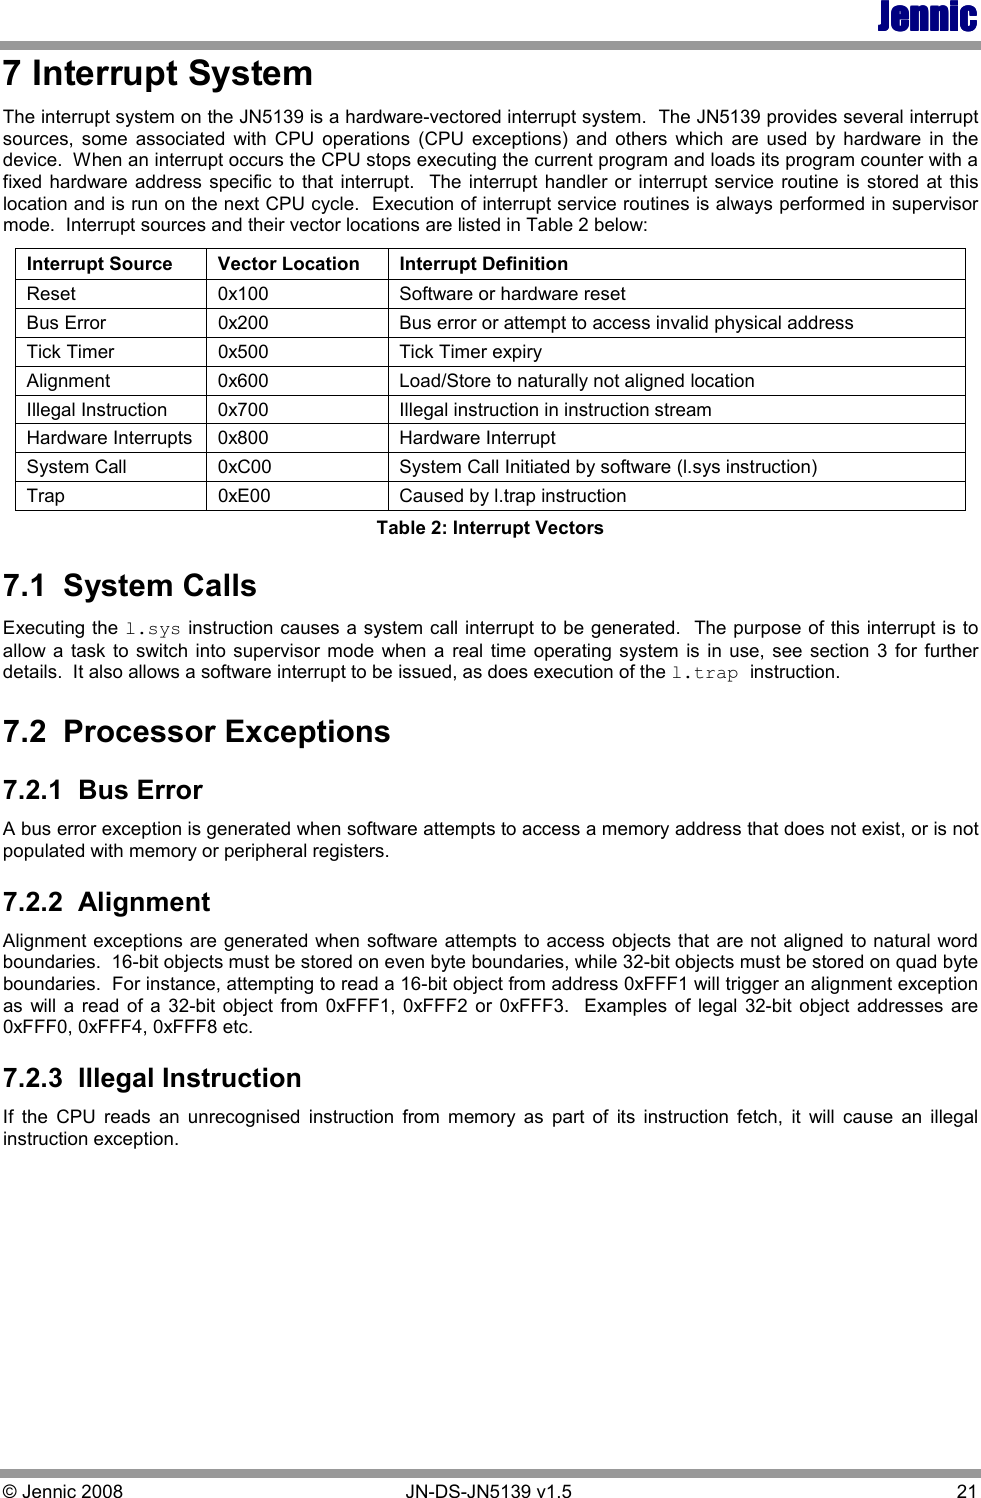 JennicJennicJennicJennic © Jennic 2008        JN-DS-JN5139 v1.5  21  7 Interrupt System The interrupt system on the JN5139 is a hardware-vectored interrupt system.  The JN5139 provides several interrupt sources,  some  associated  with  CPU  operations  (CPU  exceptions)  and  others  which  are  used  by  hardware  in  the device.  When an interrupt occurs the CPU stops executing the current program and loads its program counter with a fixed hardware address specific to that  interrupt.   The interrupt handler or interrupt service  routine is  stored  at  this location and is run on the next CPU cycle.  Execution of interrupt service routines is always performed in supervisor mode.  Interrupt sources and their vector locations are listed in Table 2 below: Interrupt Source  Vector Location  Interrupt Definition Reset  0x100  Software or hardware reset Bus Error  0x200   Bus error or attempt to access invalid physical address Tick Timer  0x500  Tick Timer expiry Alignment  0x600  Load/Store to naturally not aligned location Illegal Instruction  0x700  Illegal instruction in instruction stream Hardware Interrupts  0x800  Hardware Interrupt  System Call  0xC00  System Call Initiated by software (l.sys instruction) Trap  0xE00  Caused by l.trap instruction Table 2: Interrupt Vectors 7.1  System Calls Executing the l.sys instruction causes a system call interrupt to be generated.  The purpose of this interrupt is to allow  a  task  to switch into  supervisor mode when  a  real  time  operating  system  is  in use, see  section  3 for further details.  It also allows a software interrupt to be issued, as does execution of the l.trap instruction. 7.2  Processor Exceptions 7.2.1  Bus Error A bus error exception is generated when software attempts to access a memory address that does not exist, or is not populated with memory or peripheral registers. 7.2.2  Alignment Alignment exceptions are generated when software attempts to access objects that are not aligned to natural word boundaries.  16-bit objects must be stored on even byte boundaries, while 32-bit objects must be stored on quad byte boundaries.  For instance, attempting to read a 16-bit object from address 0xFFF1 will trigger an alignment exception as  will  a  read  of  a  32-bit  object  from  0xFFF1,  0xFFF2  or  0xFFF3.   Examples  of legal 32-bit  object  addresses  are 0xFFF0, 0xFFF4, 0xFFF8 etc. 7.2.3  Illegal Instruction If  the  CPU  reads  an  unrecognised  instruction  from  memory  as  part  of  its  instruction  fetch,  it  will  cause  an  illegal instruction exception.   